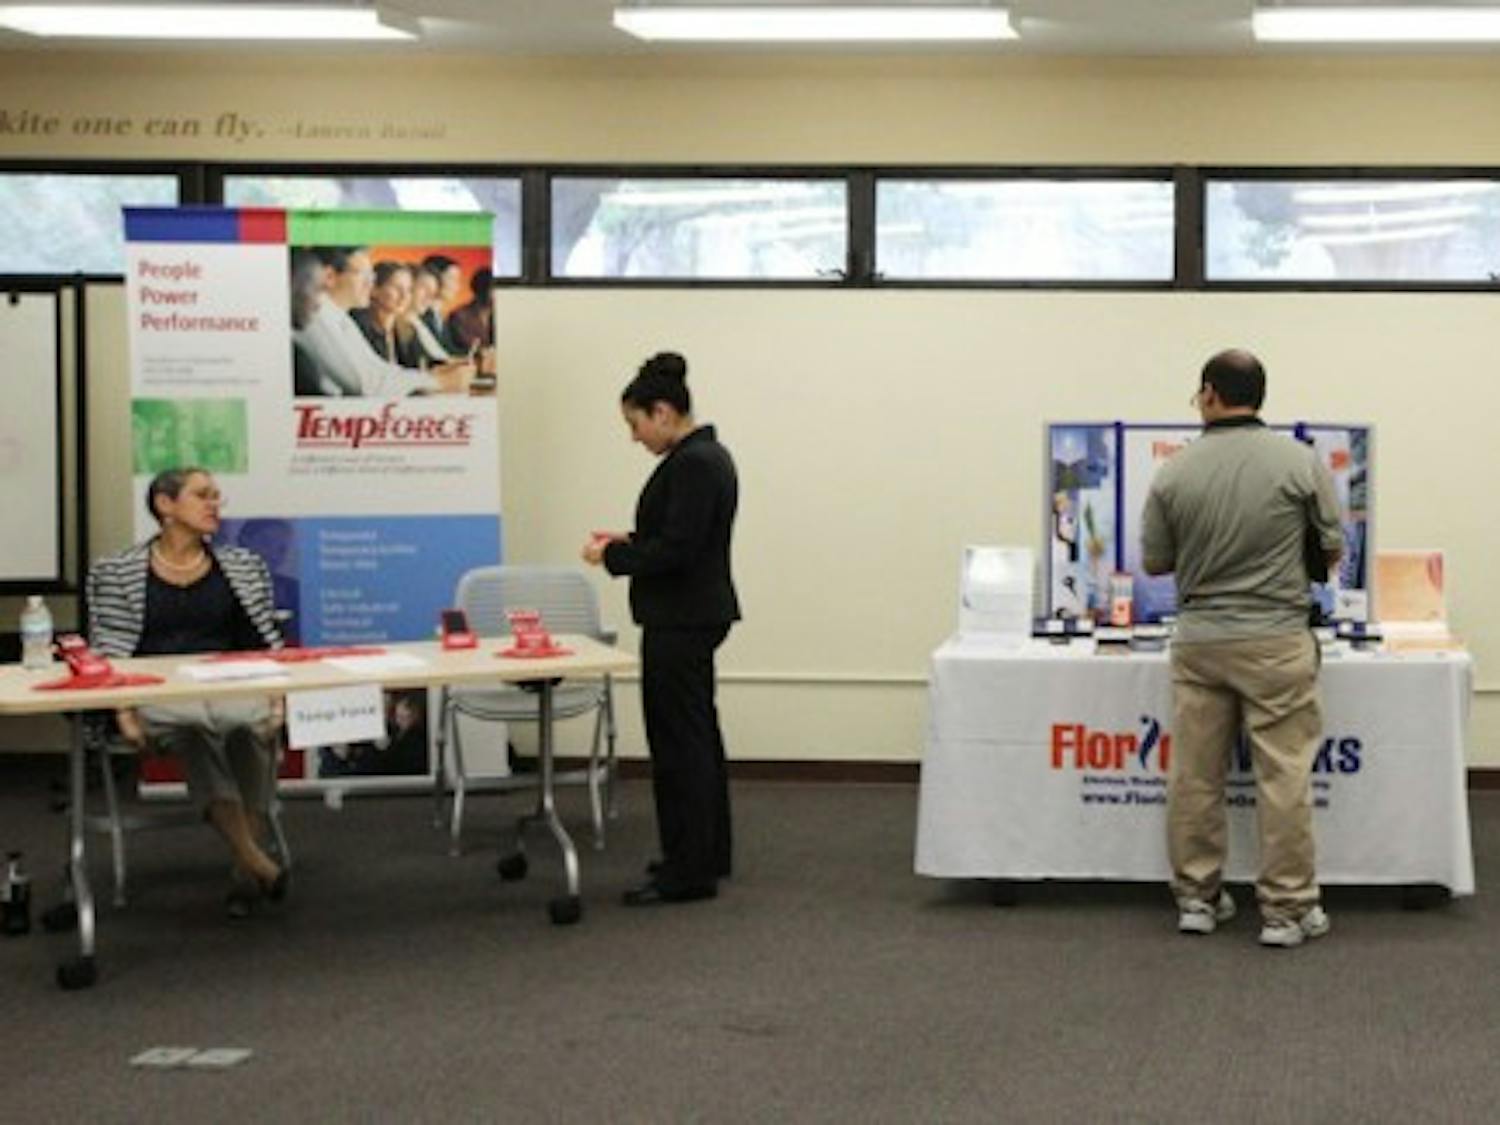 Enactus, a UF business organization, hosted a job fair Wednesday for adults hoping to re-enter the workforce. The organization provided resume critiques and mock interviews. Six job seekers participated.